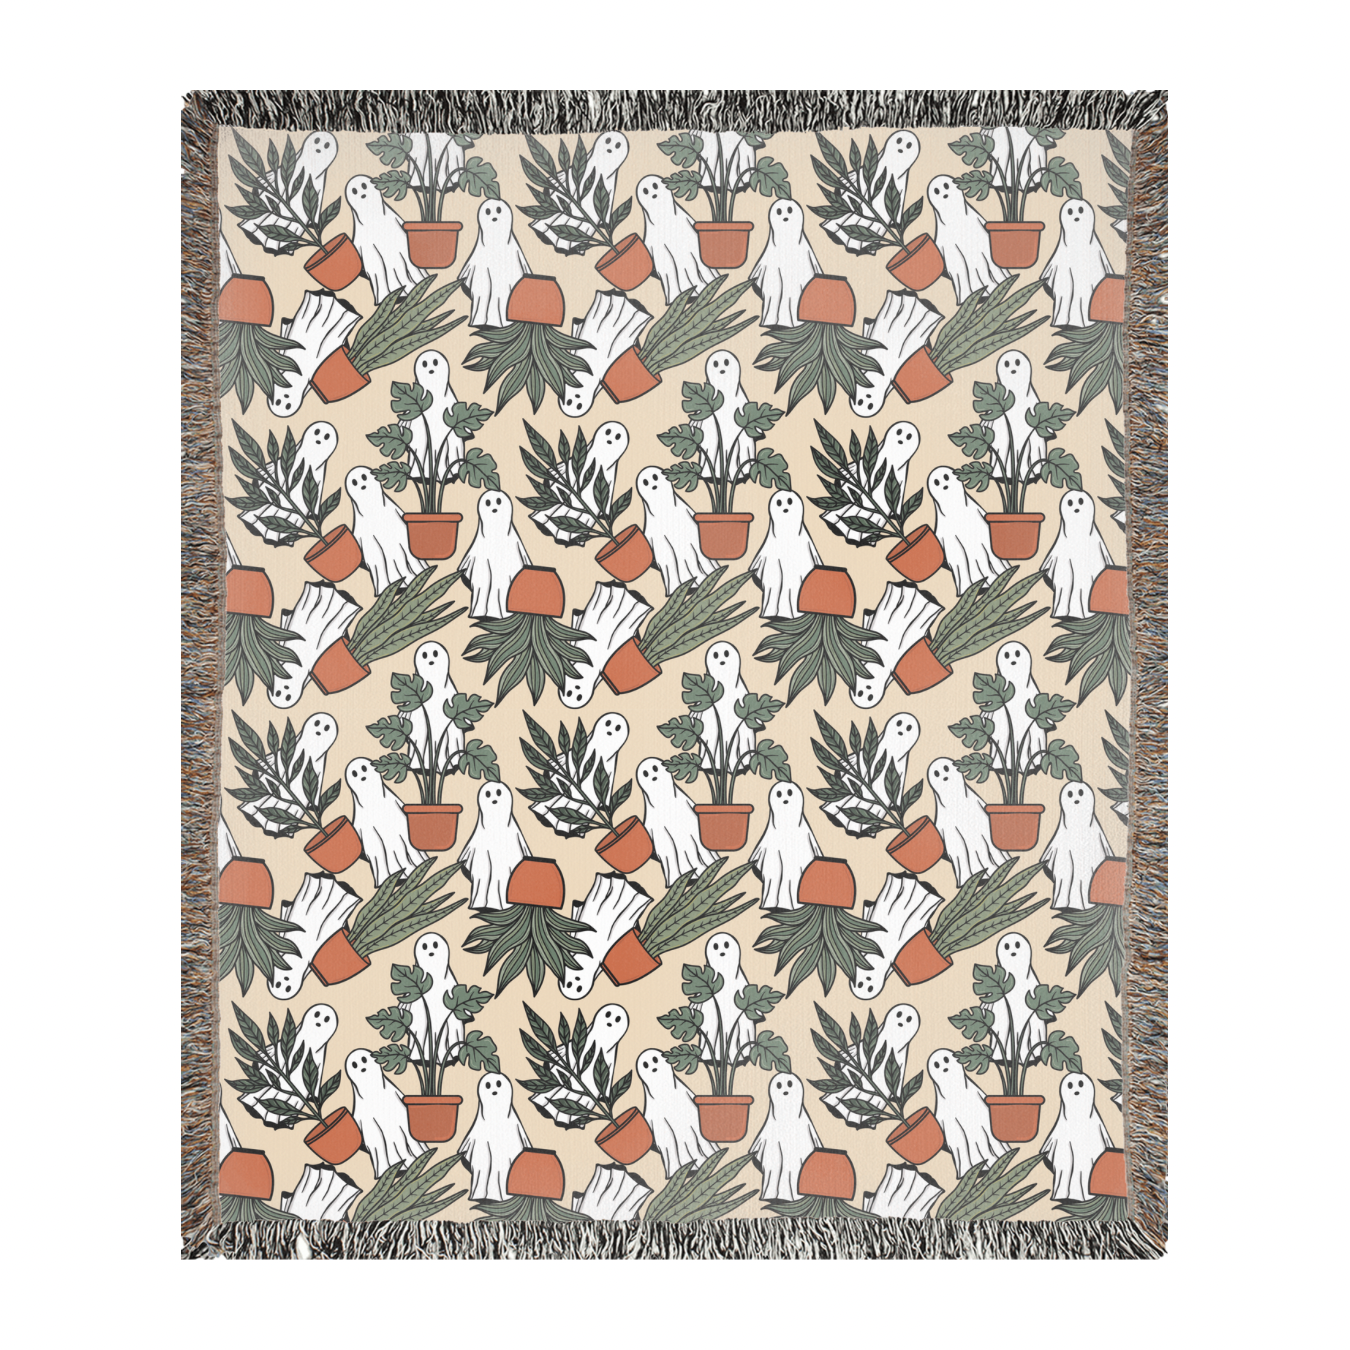 Potted plants and ghosts woven blanket 50x60” clearance